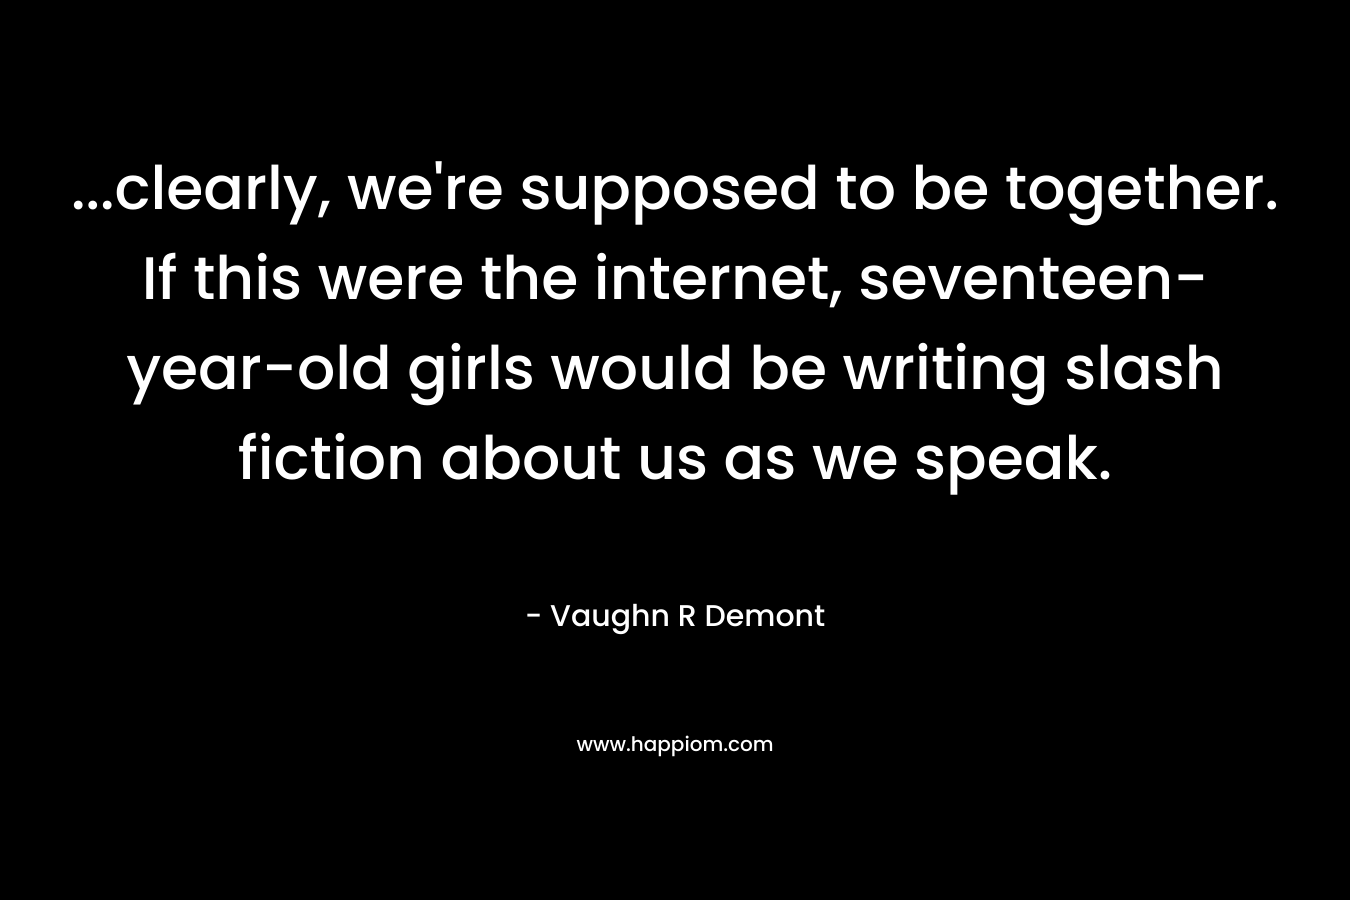 …clearly, we’re supposed to be together. If this were the internet, seventeen-year-old girls would be writing slash fiction about us as we speak. – Vaughn R Demont